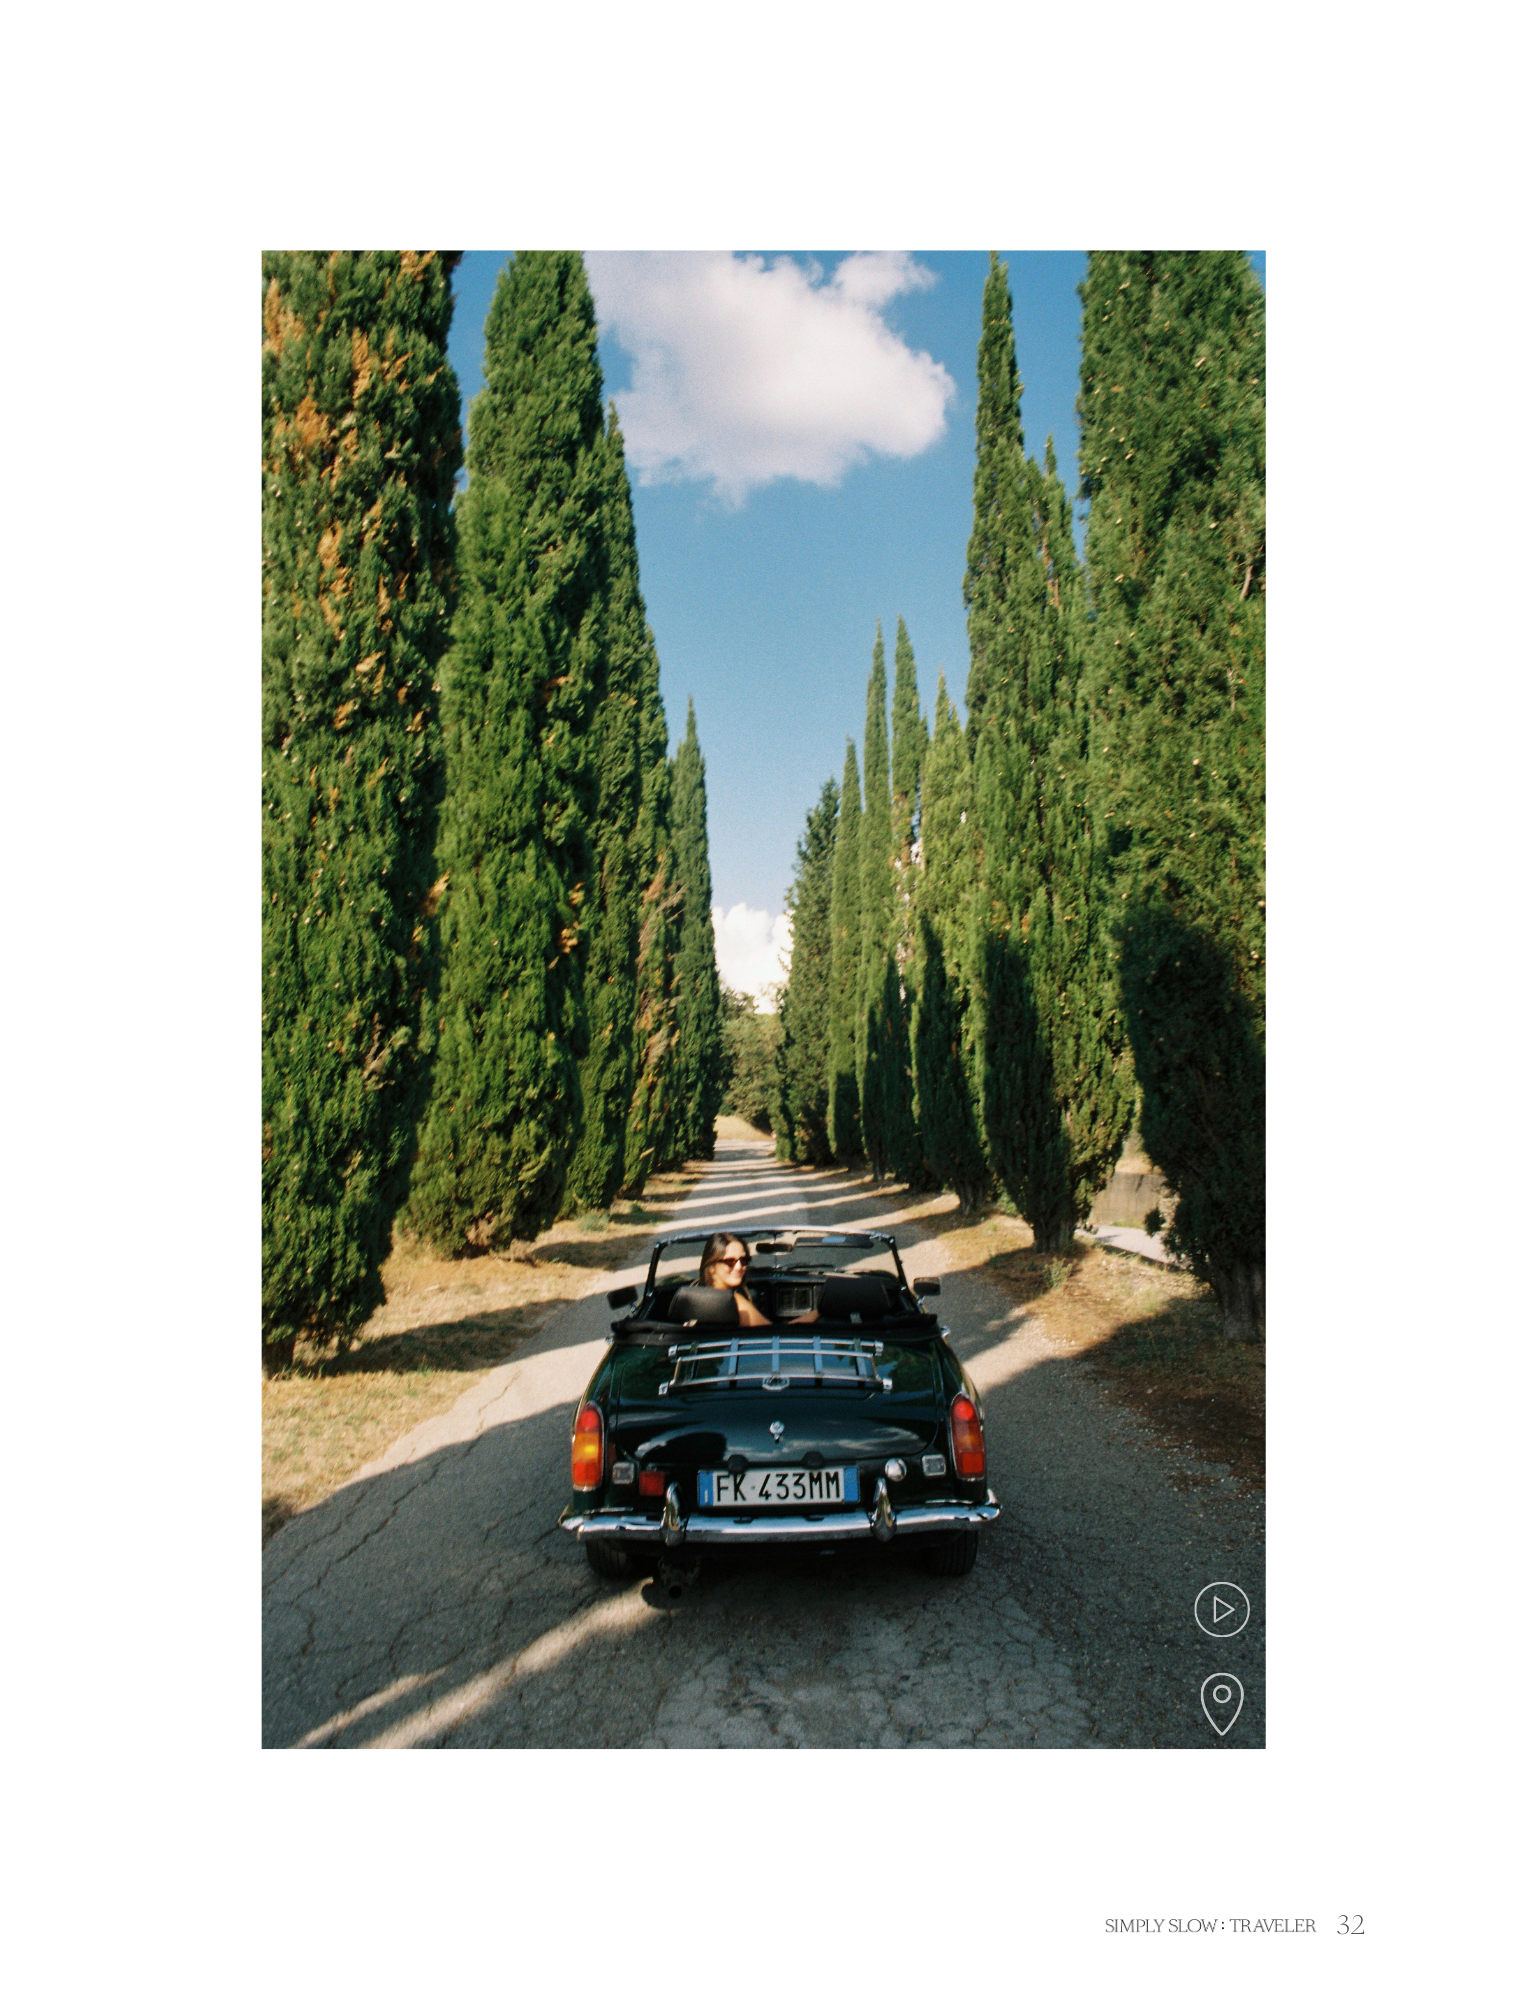 A Guide to Tuscany - page with photo of classic car and cypresses, by Simply Slow Traveler